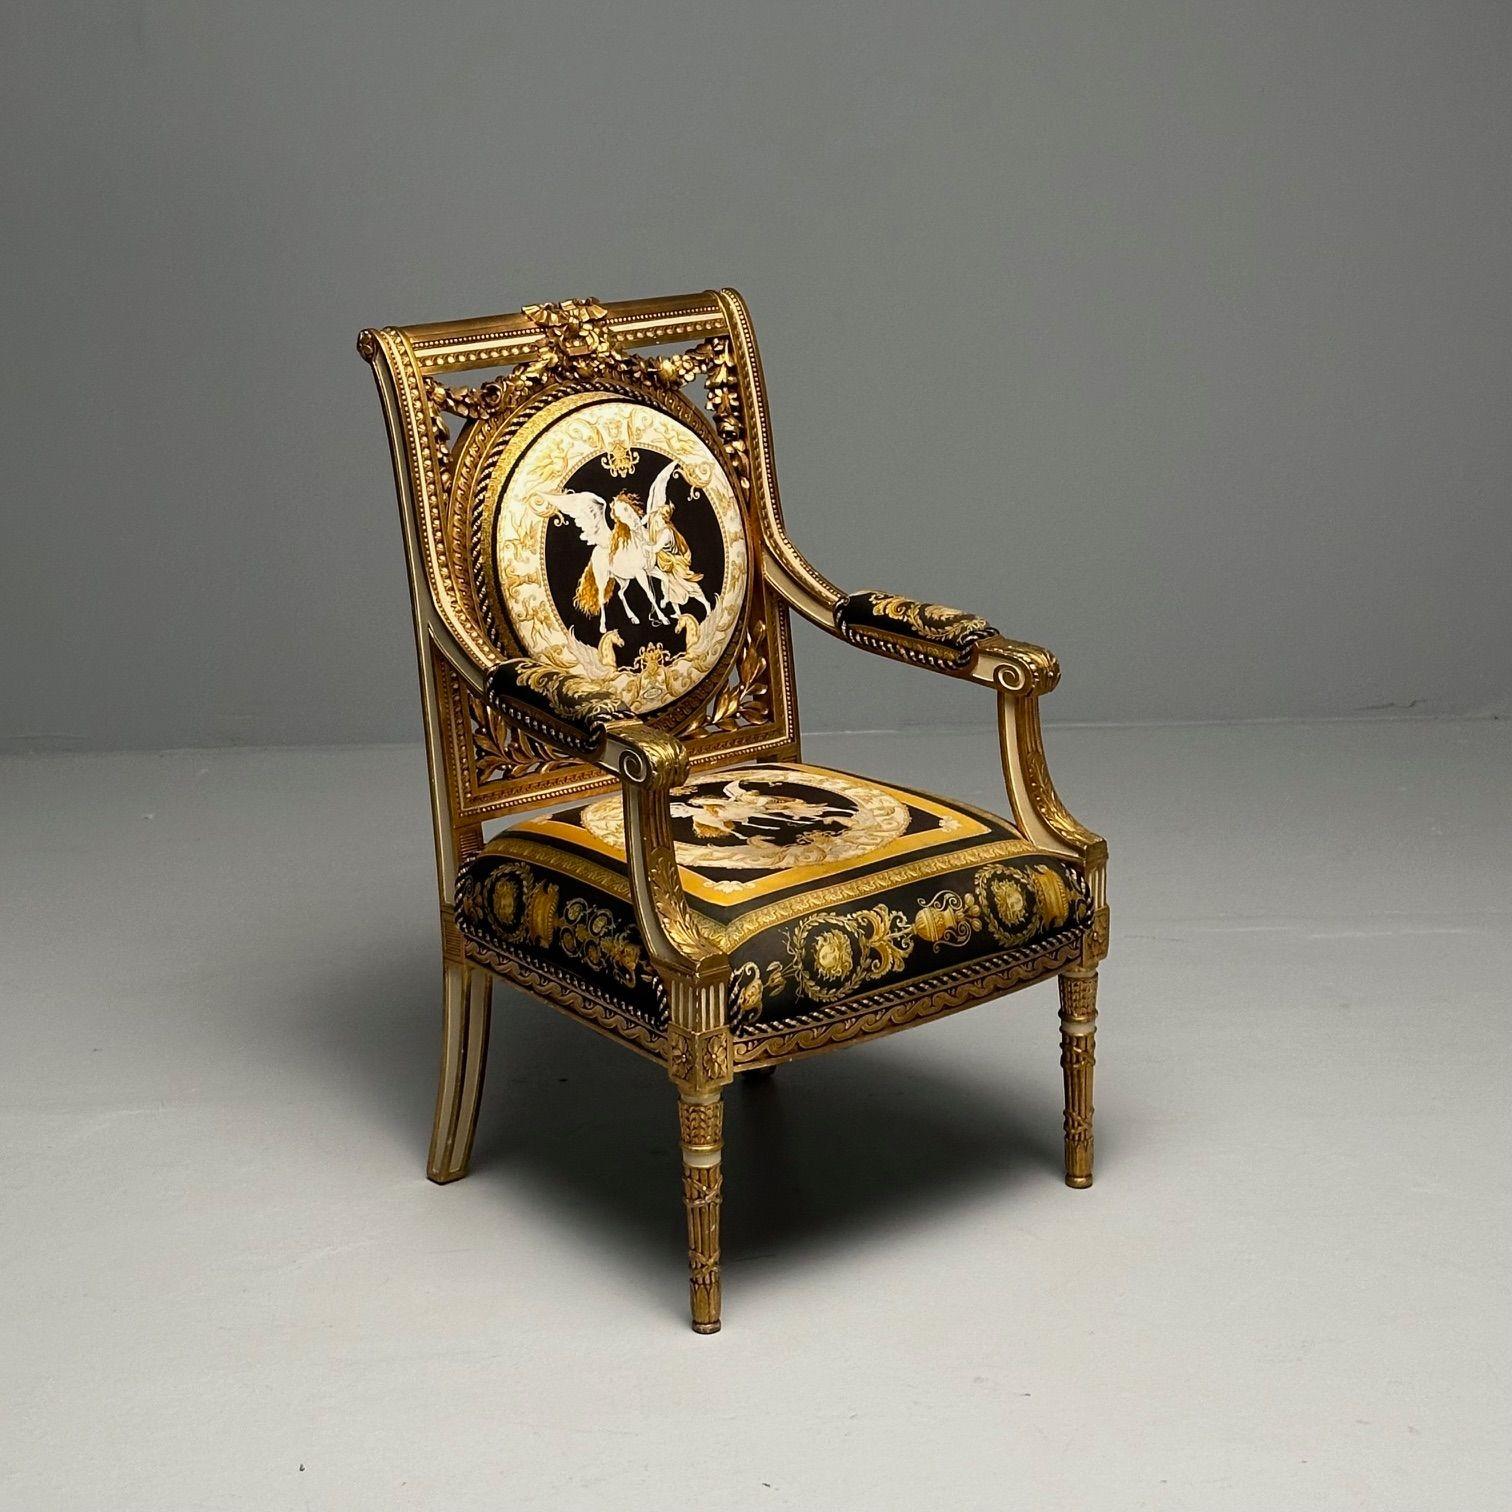 Louis XVI, French Arm Chair, Versace Fabric, Giltwood, France, 1960s

A Louis XVI style armchair designed and produced in France. Finest Versace upholstery covers this one of a kind work of art. Intricate hand carved detailing throughout. The